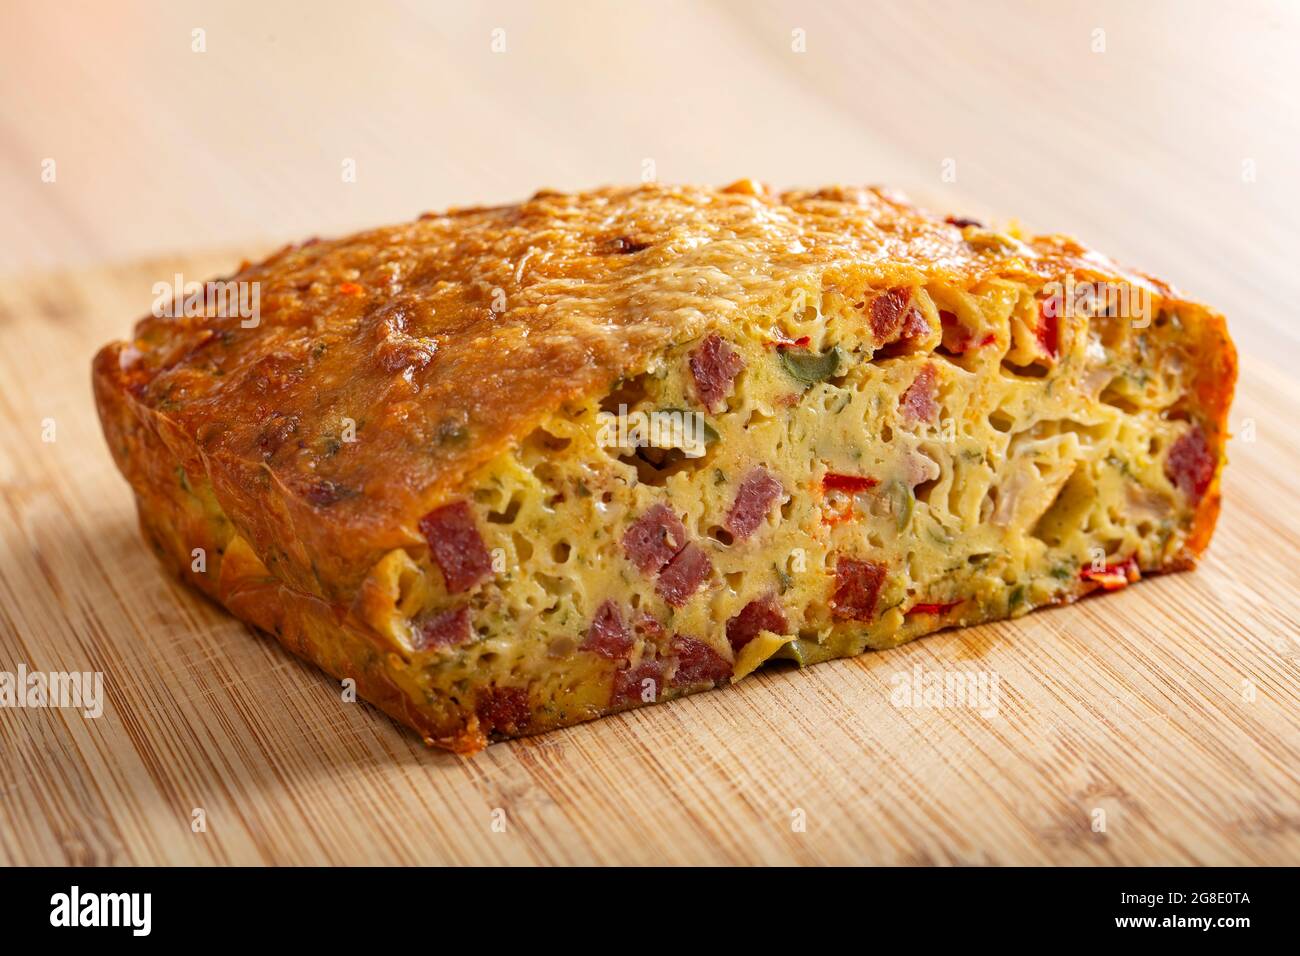 Salted cake made from eggs, cheese, olives, salami, mushrooms and red pepper Stock Photo